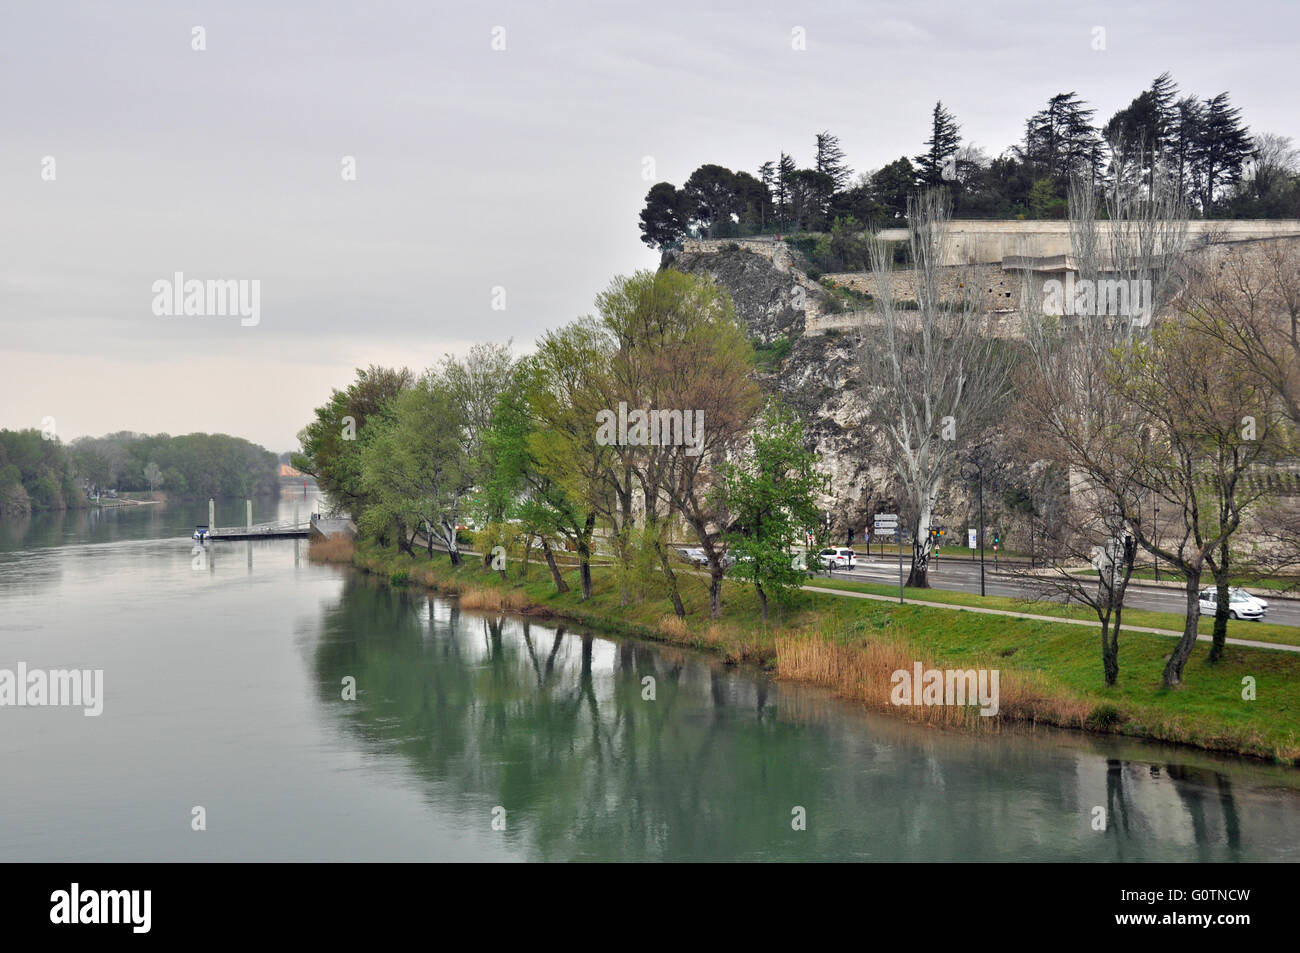 The Rhone river in Avignon, Provence, France. A view from the famous bridge Pont St Benezet. Stock Photo